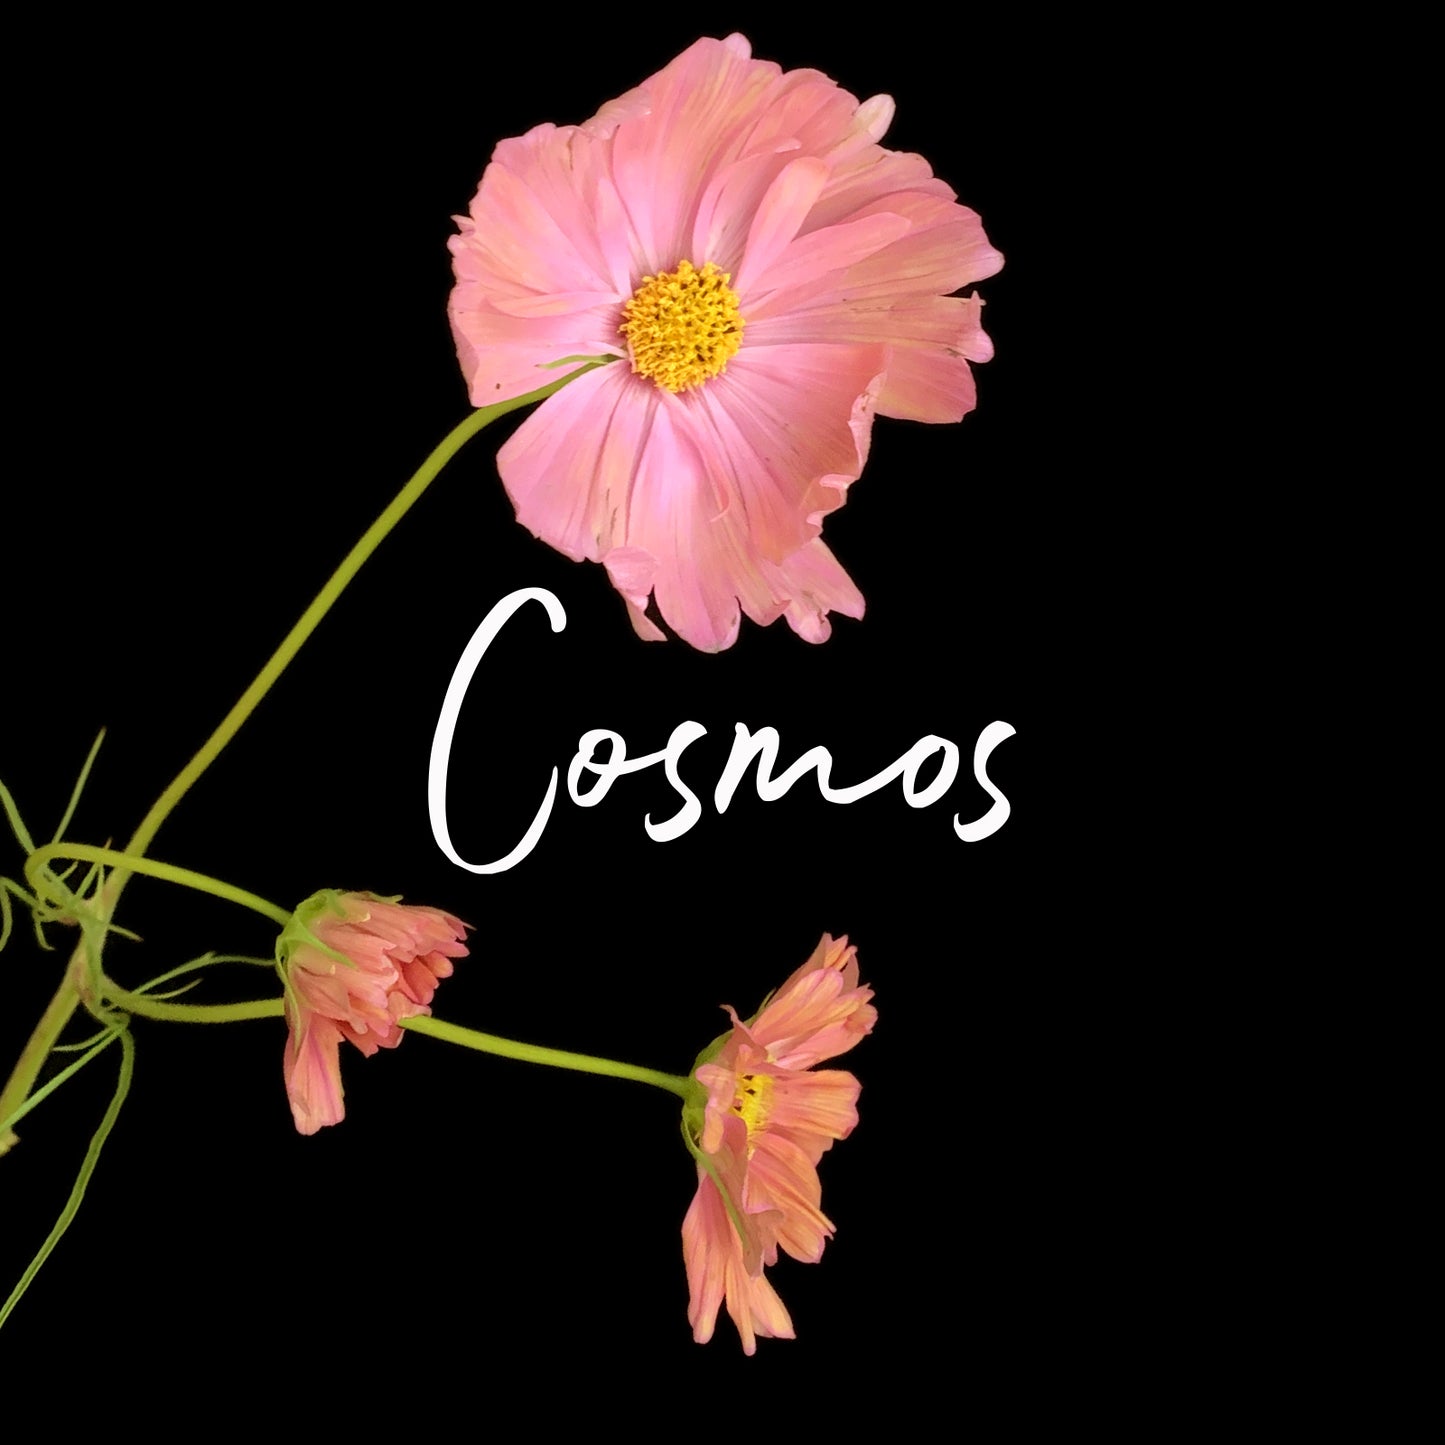 A pink Cosmos flower with a dark background. Order online for plants & flowers from the best florist in Toronto near you.